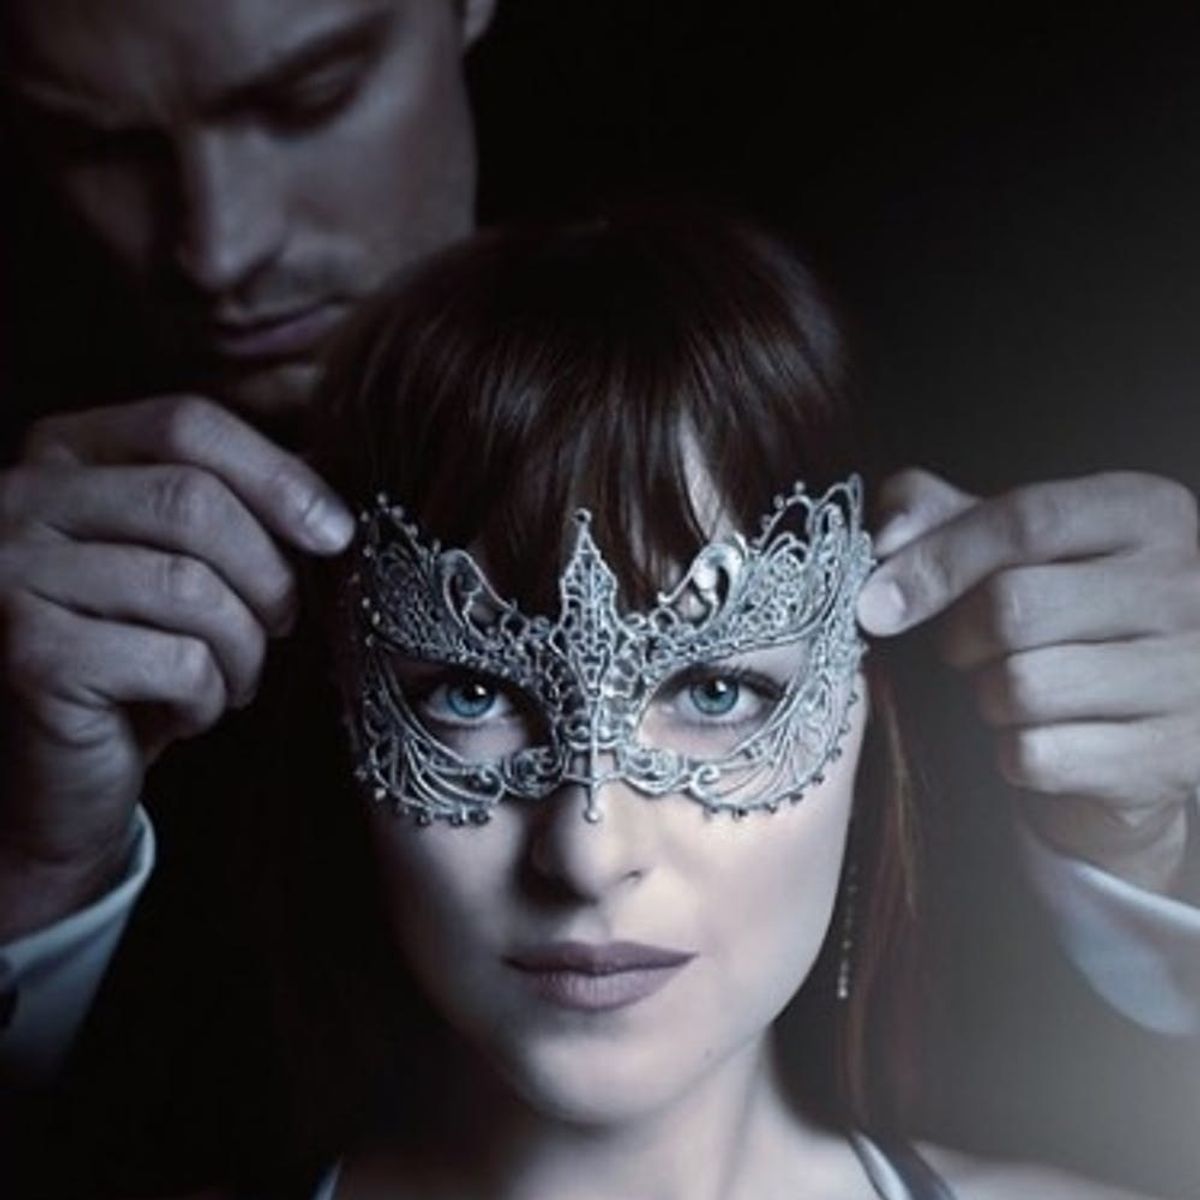 The New Fifty Shades Darker Trailer Is Steamy and Way Mysterious